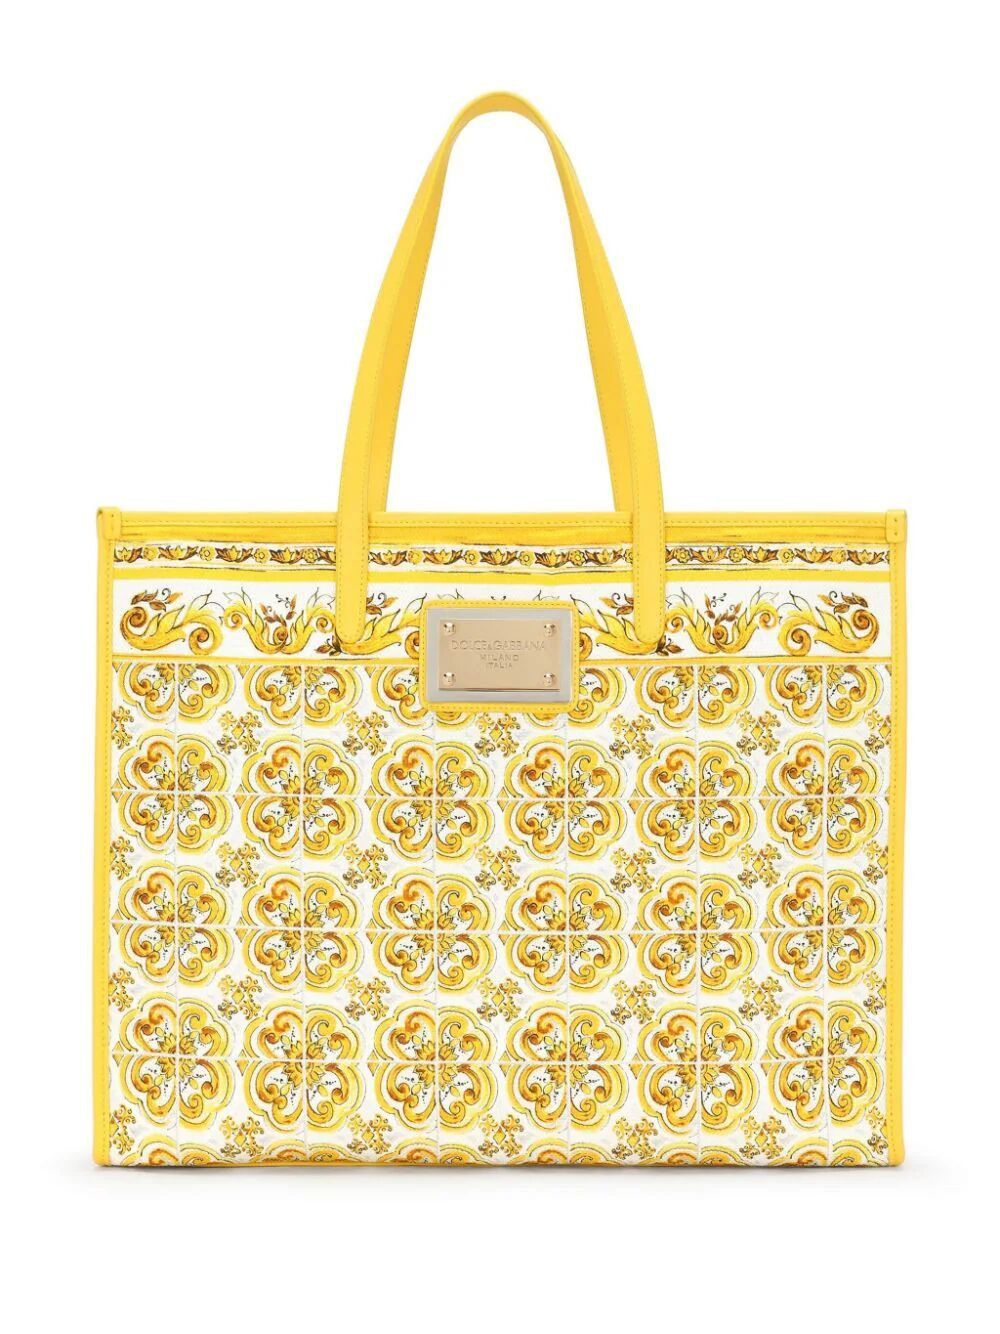 DOLCE & GABBANA Women's Large Yellow Canvas Tote Shopping Bag for Fall/Winter 2024